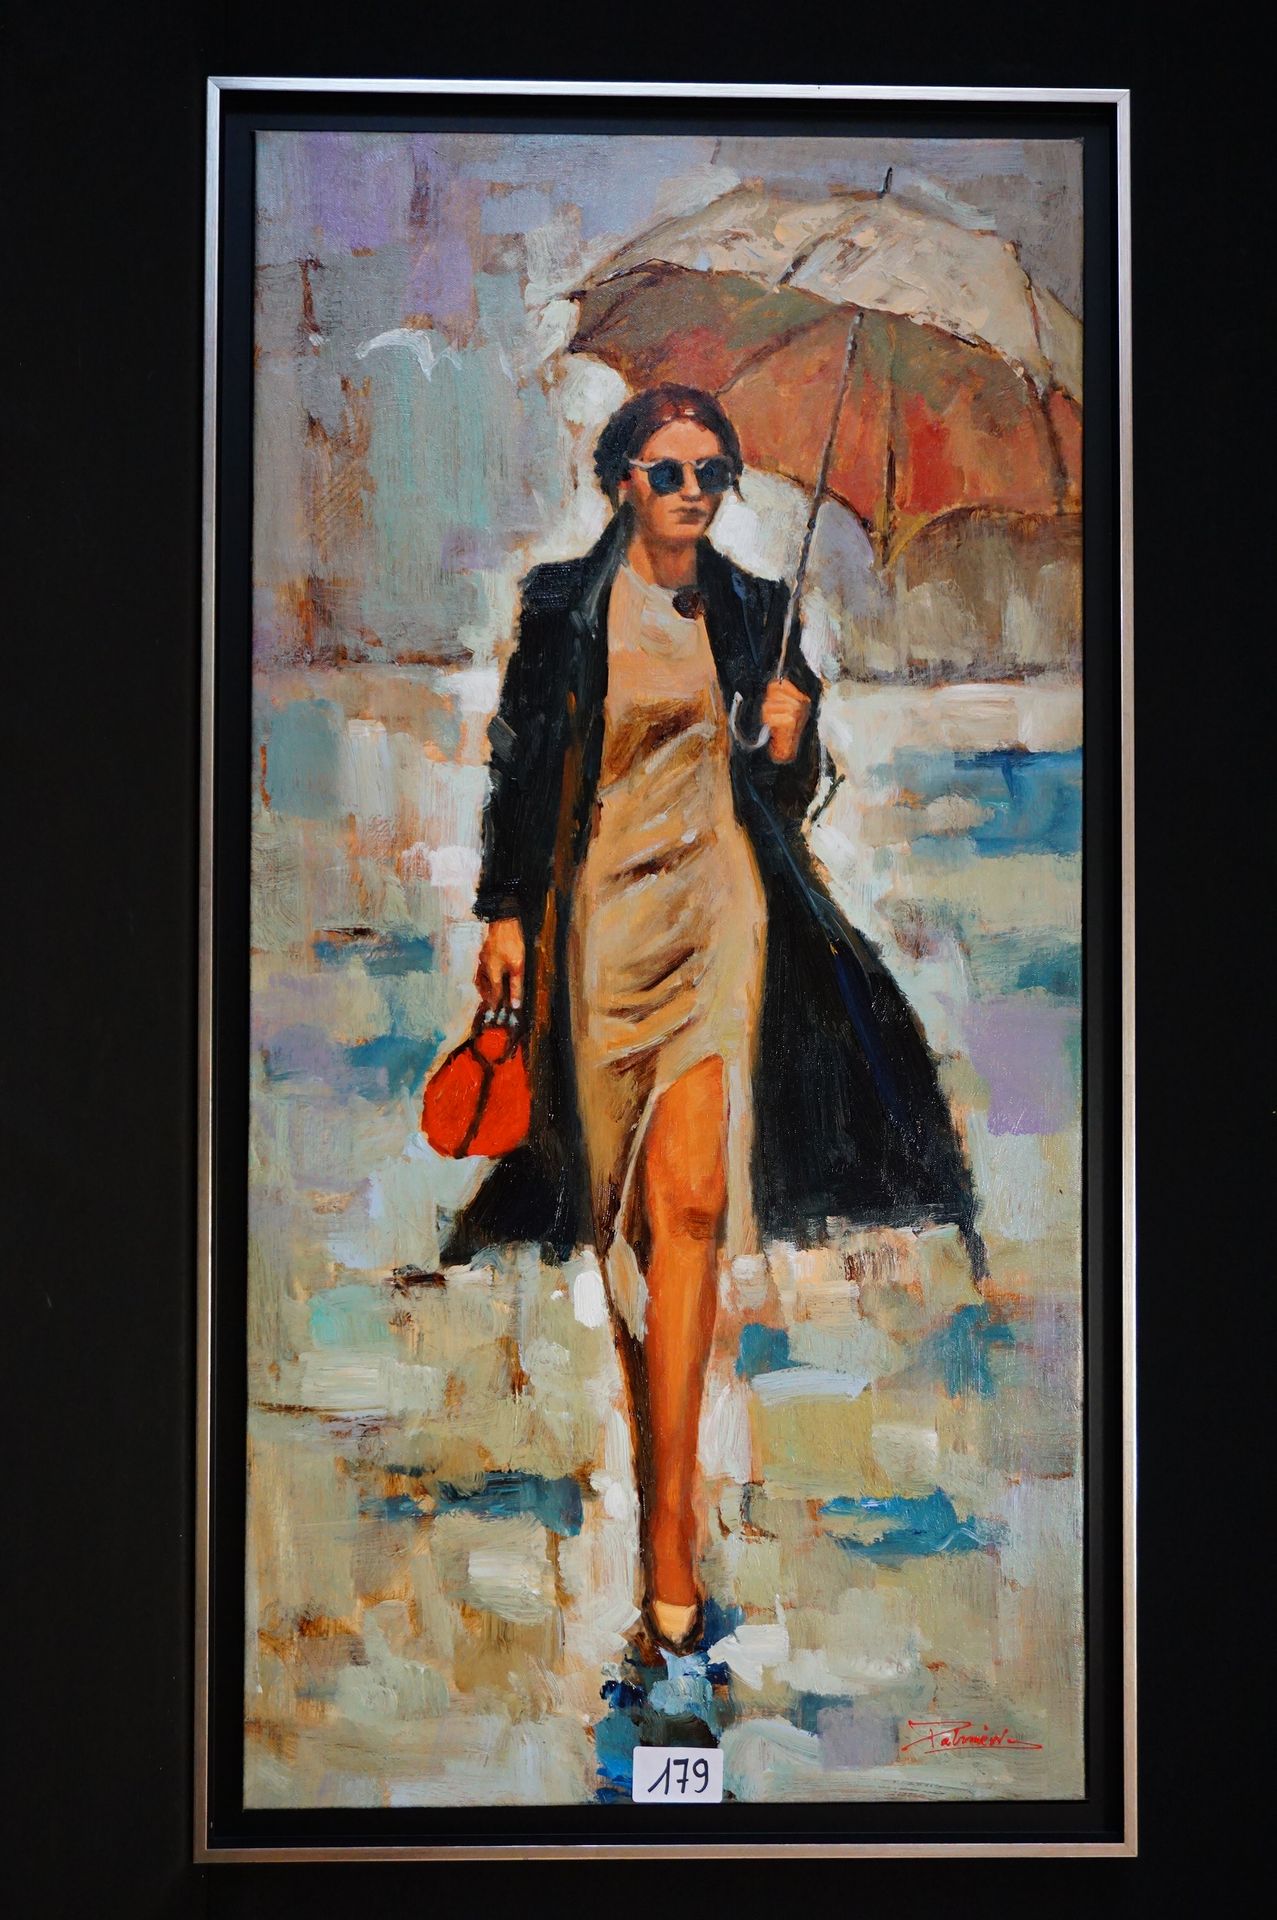 ANTONIO PALMIERI (1946 - ) "Young woman with umbrella" - Oil on canvas - Signed &hellip;